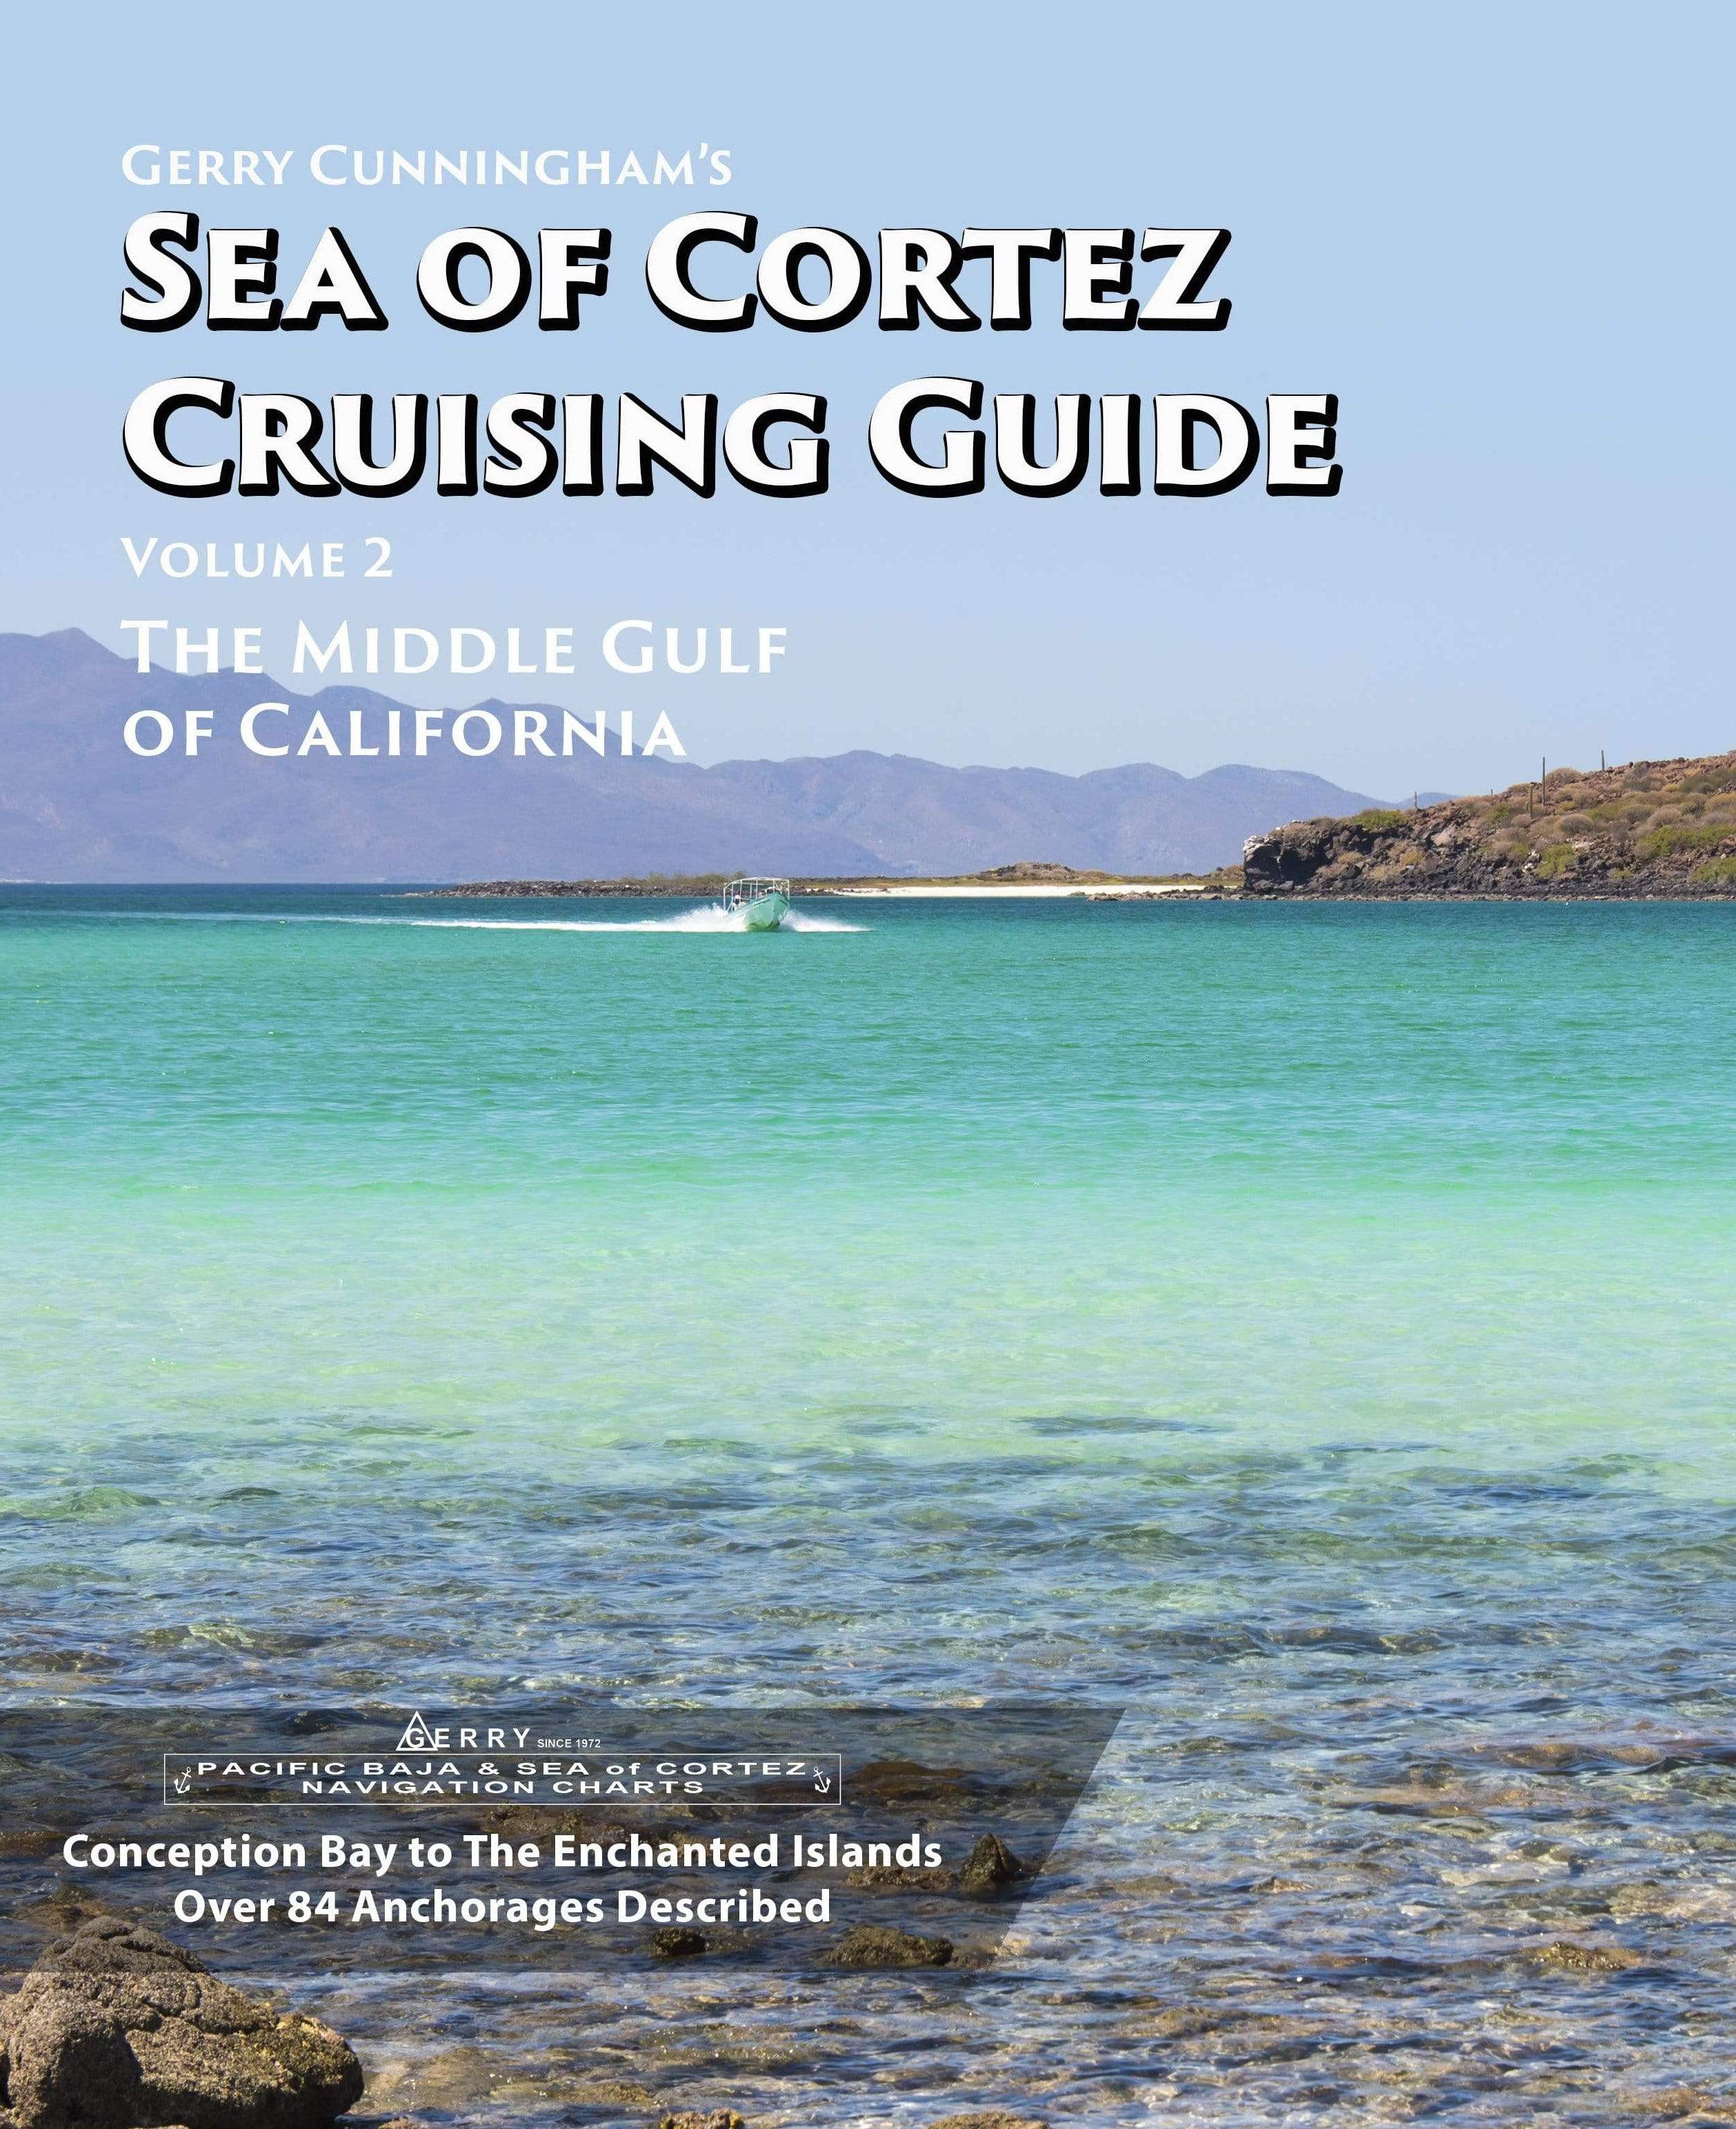 Gerry Cunningham's Sea of Cortez Cruising Guide: Volume 2, The Middle Gulf of California